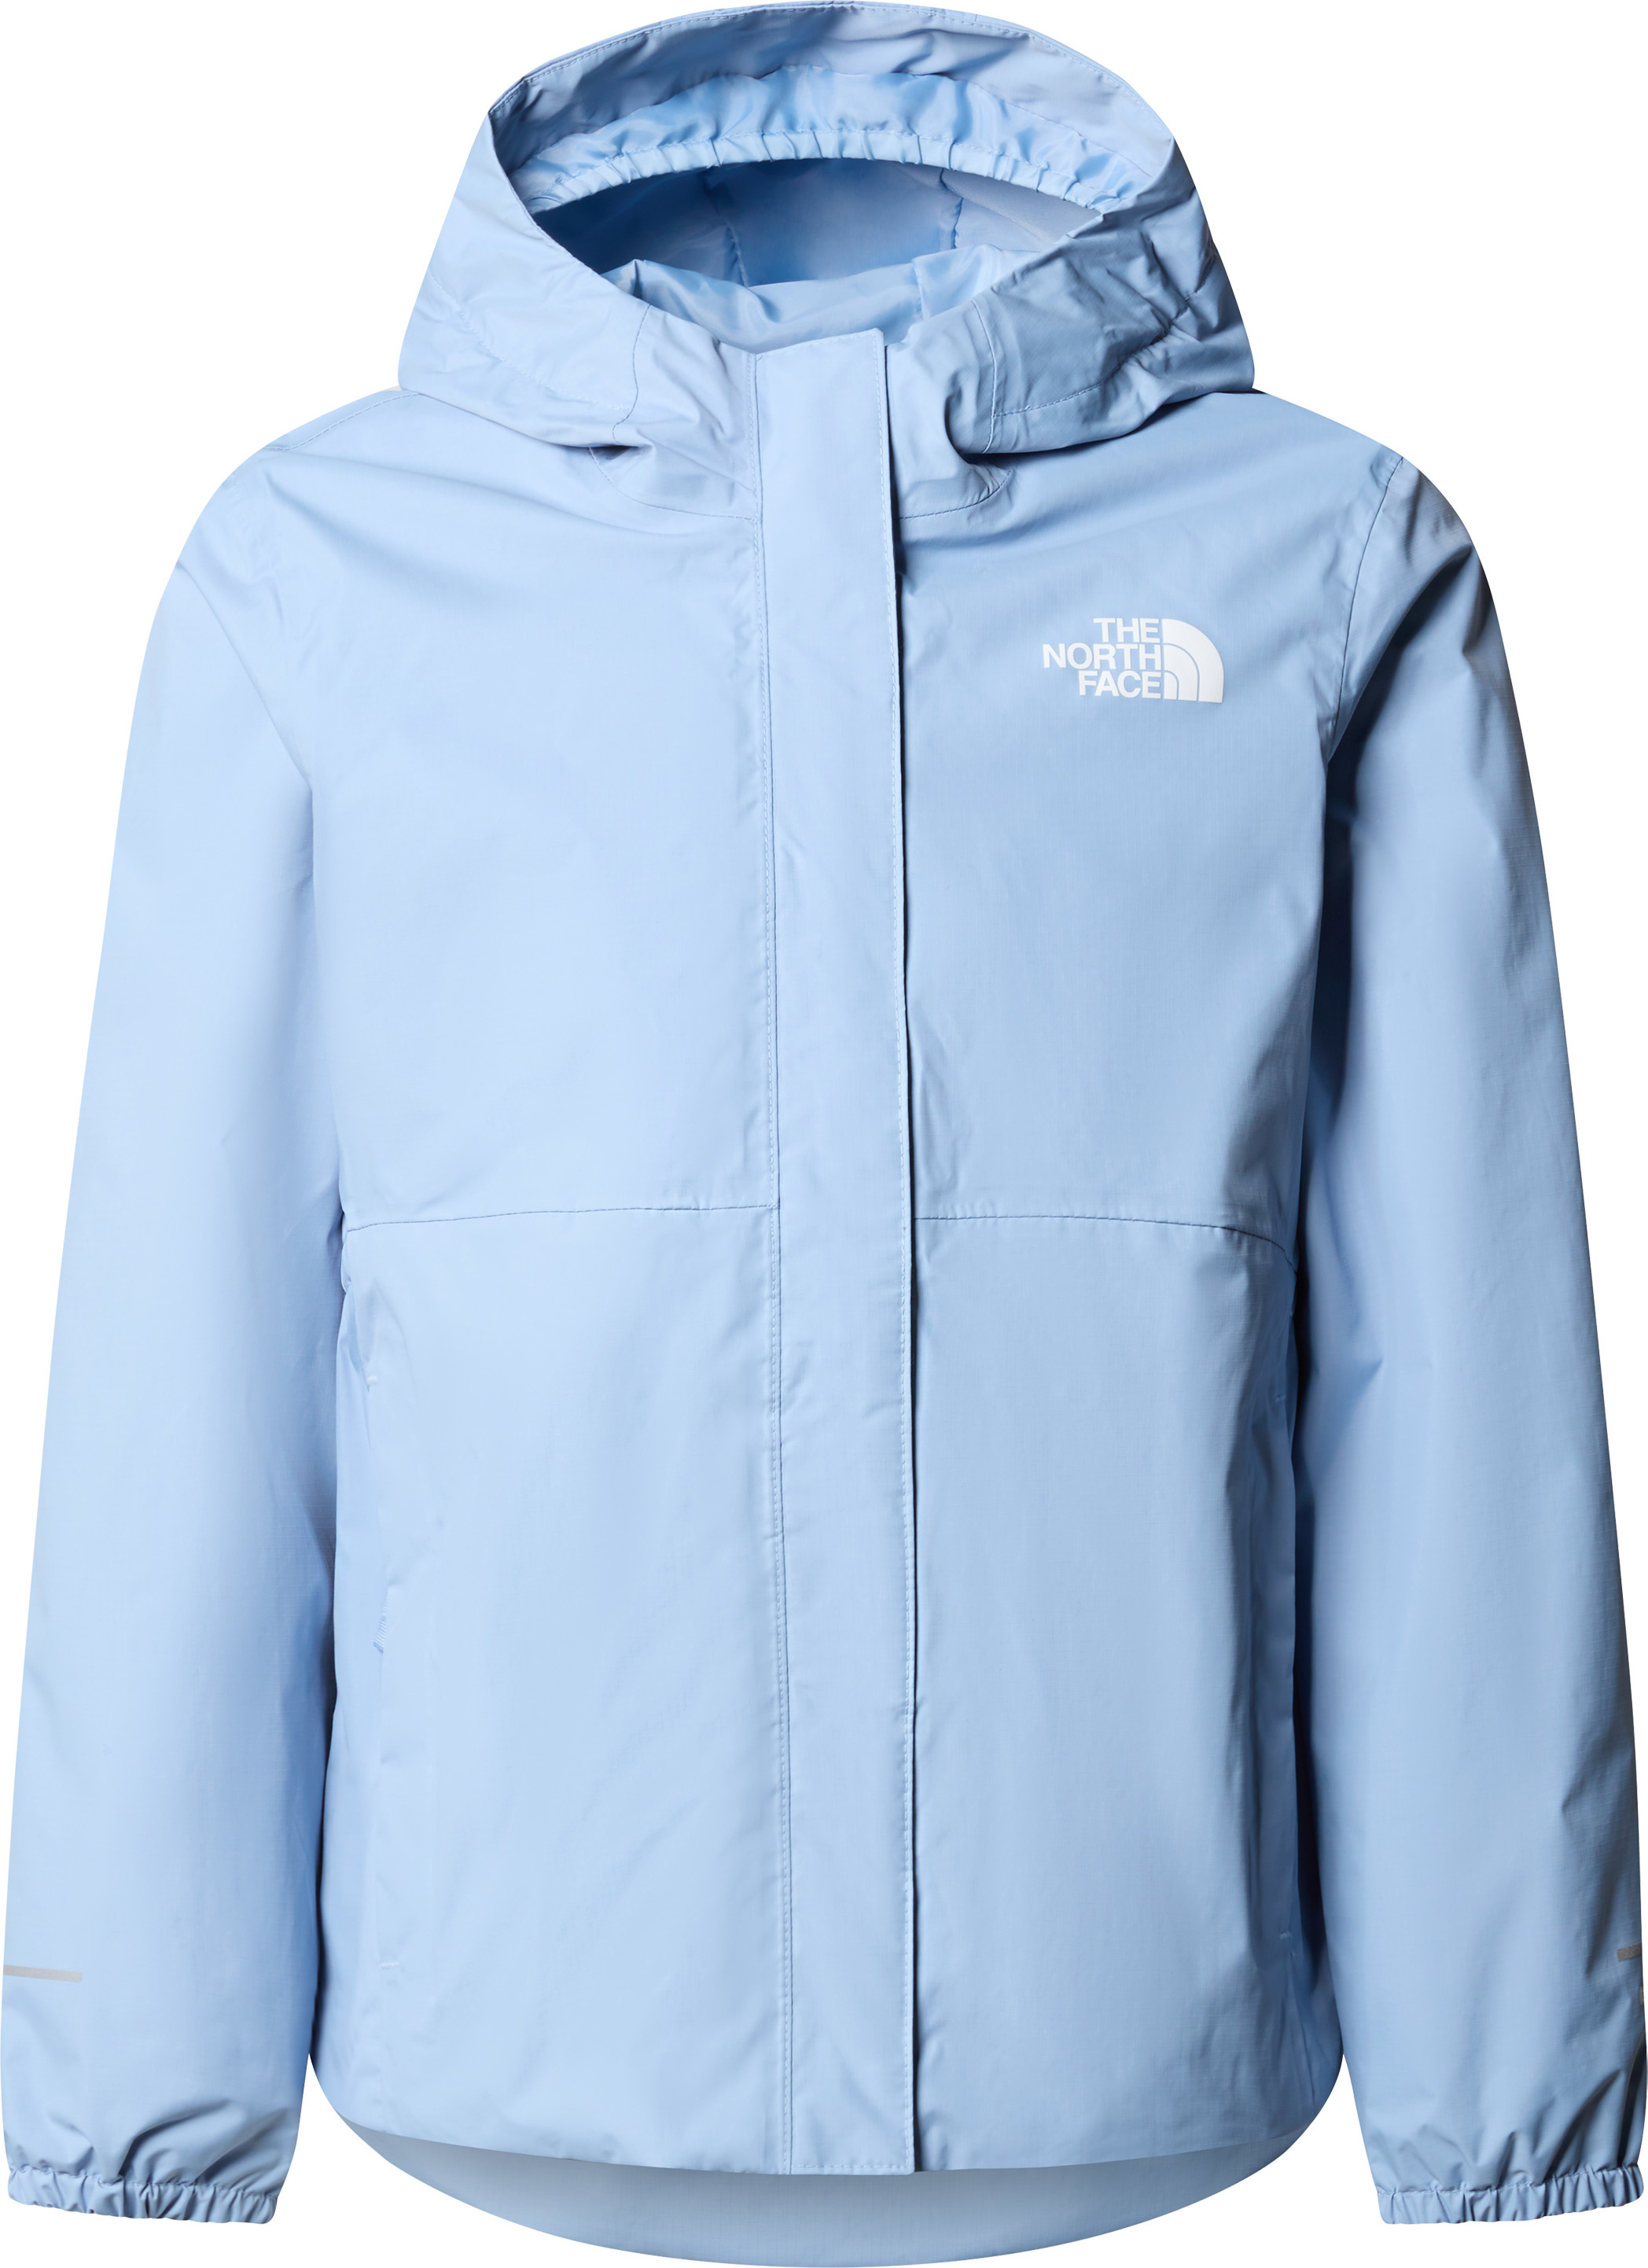 The North Face The North Face G Antora Rain Jacket Steel Blue XL, Steel Blue